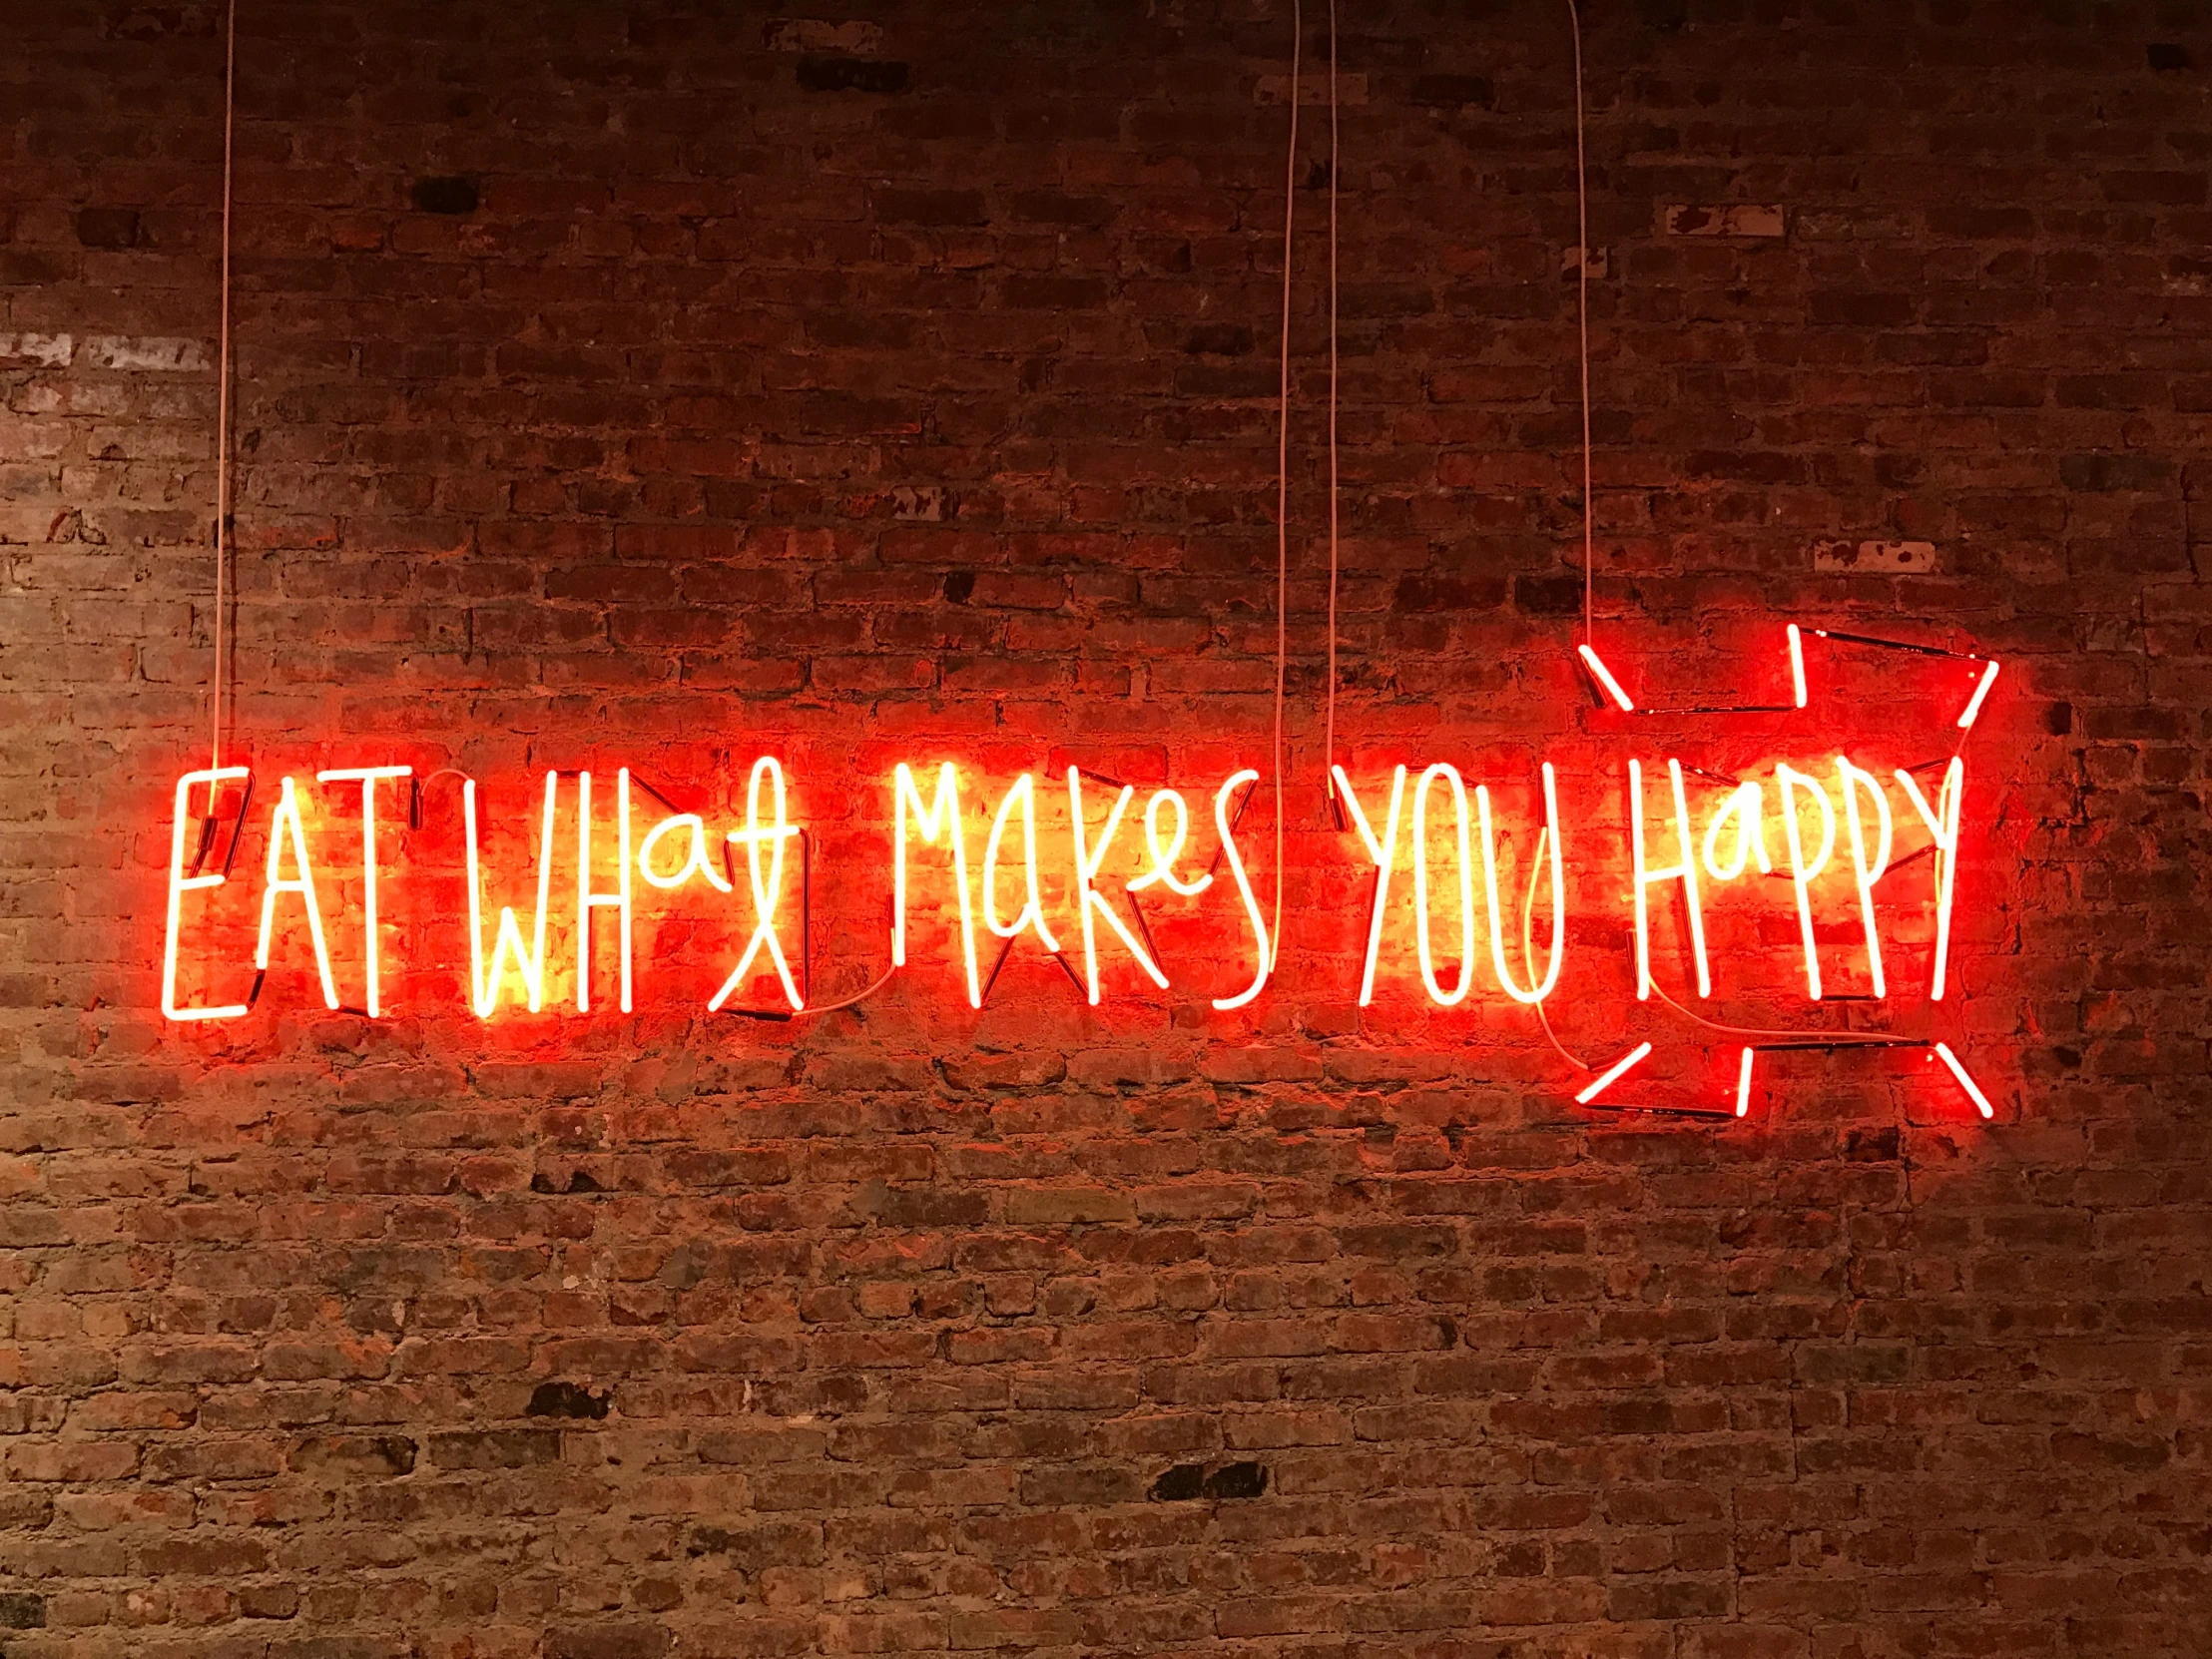 there is a neon sign that says eat what makes you happy